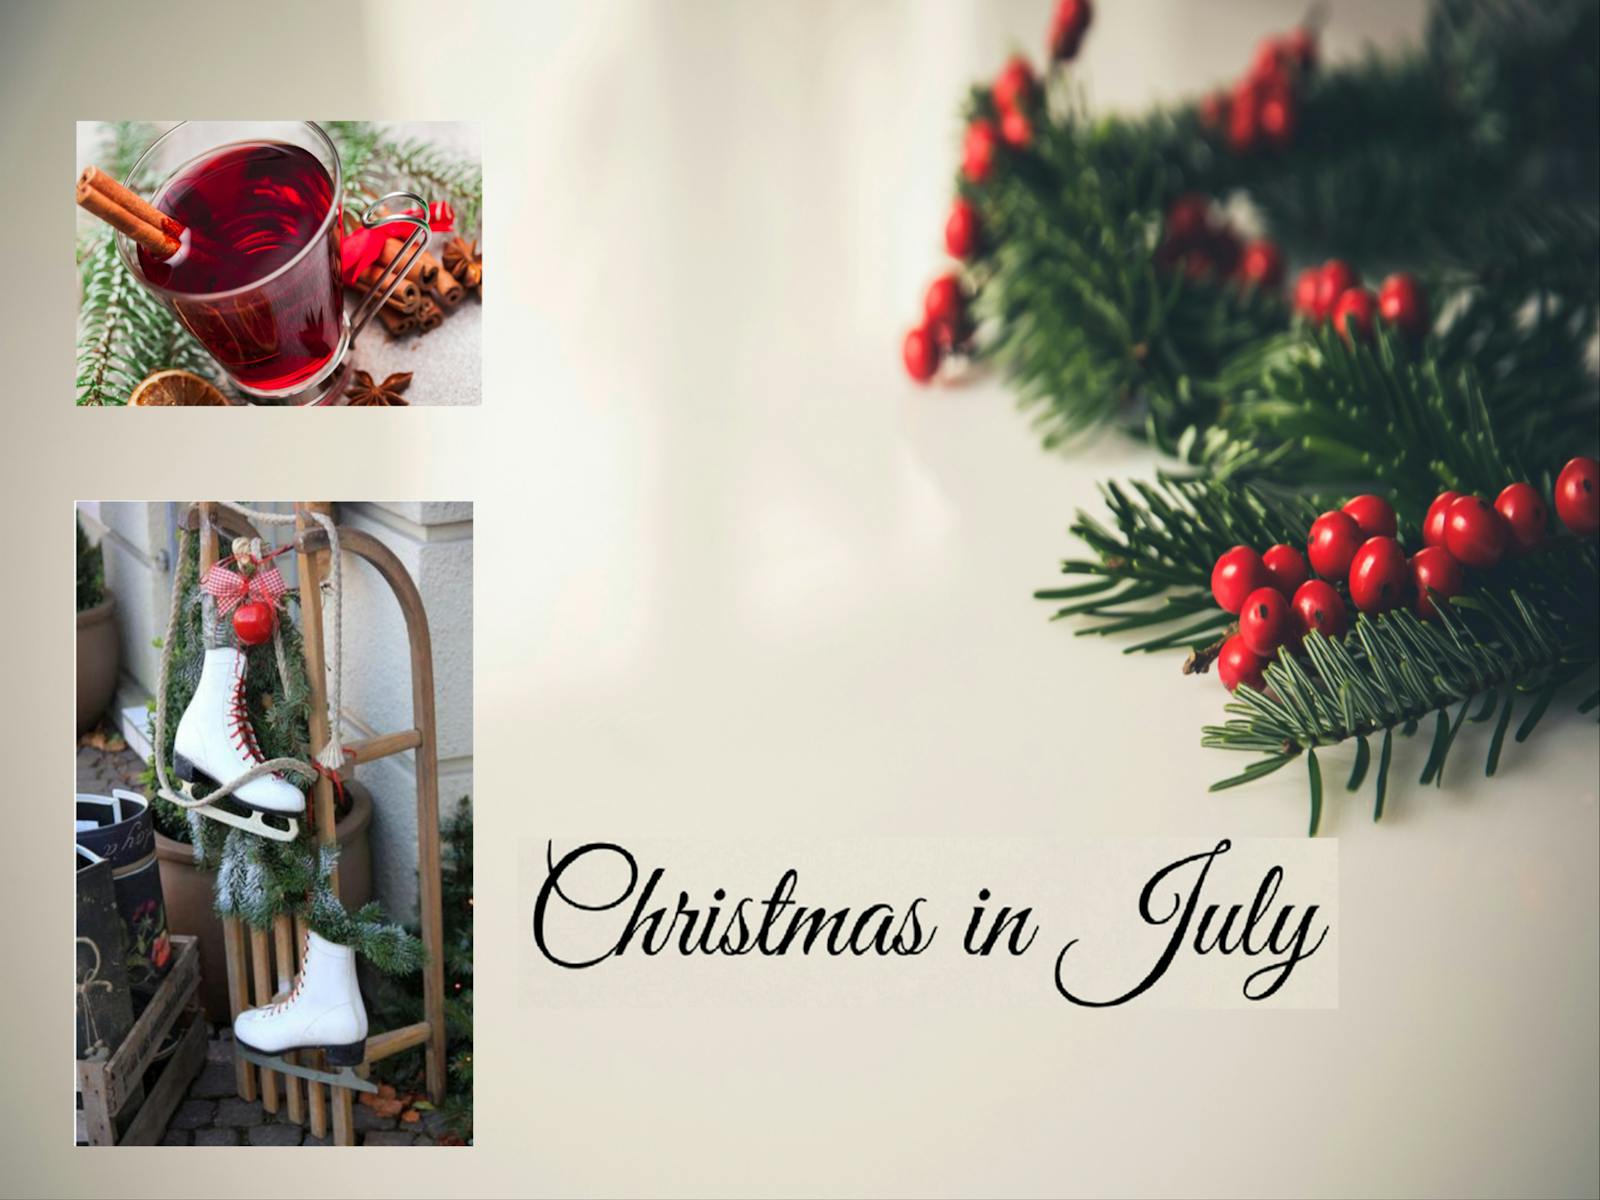 Image for Christmas in July at Ice Zoo